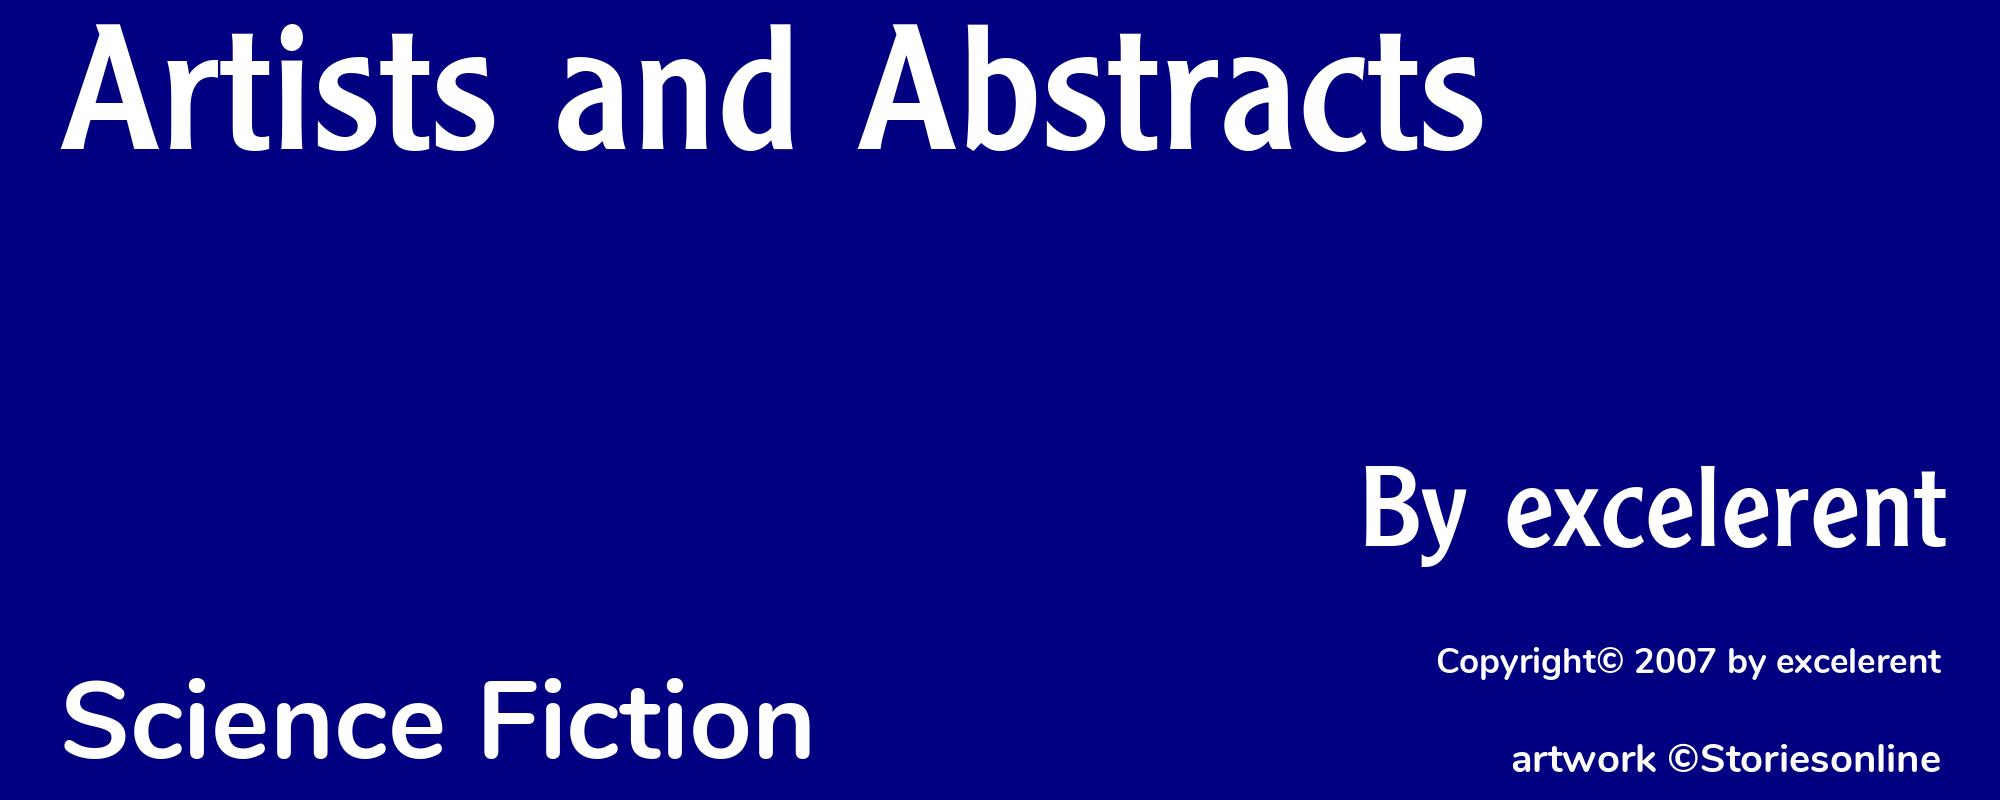 Artists and Abstracts - Cover